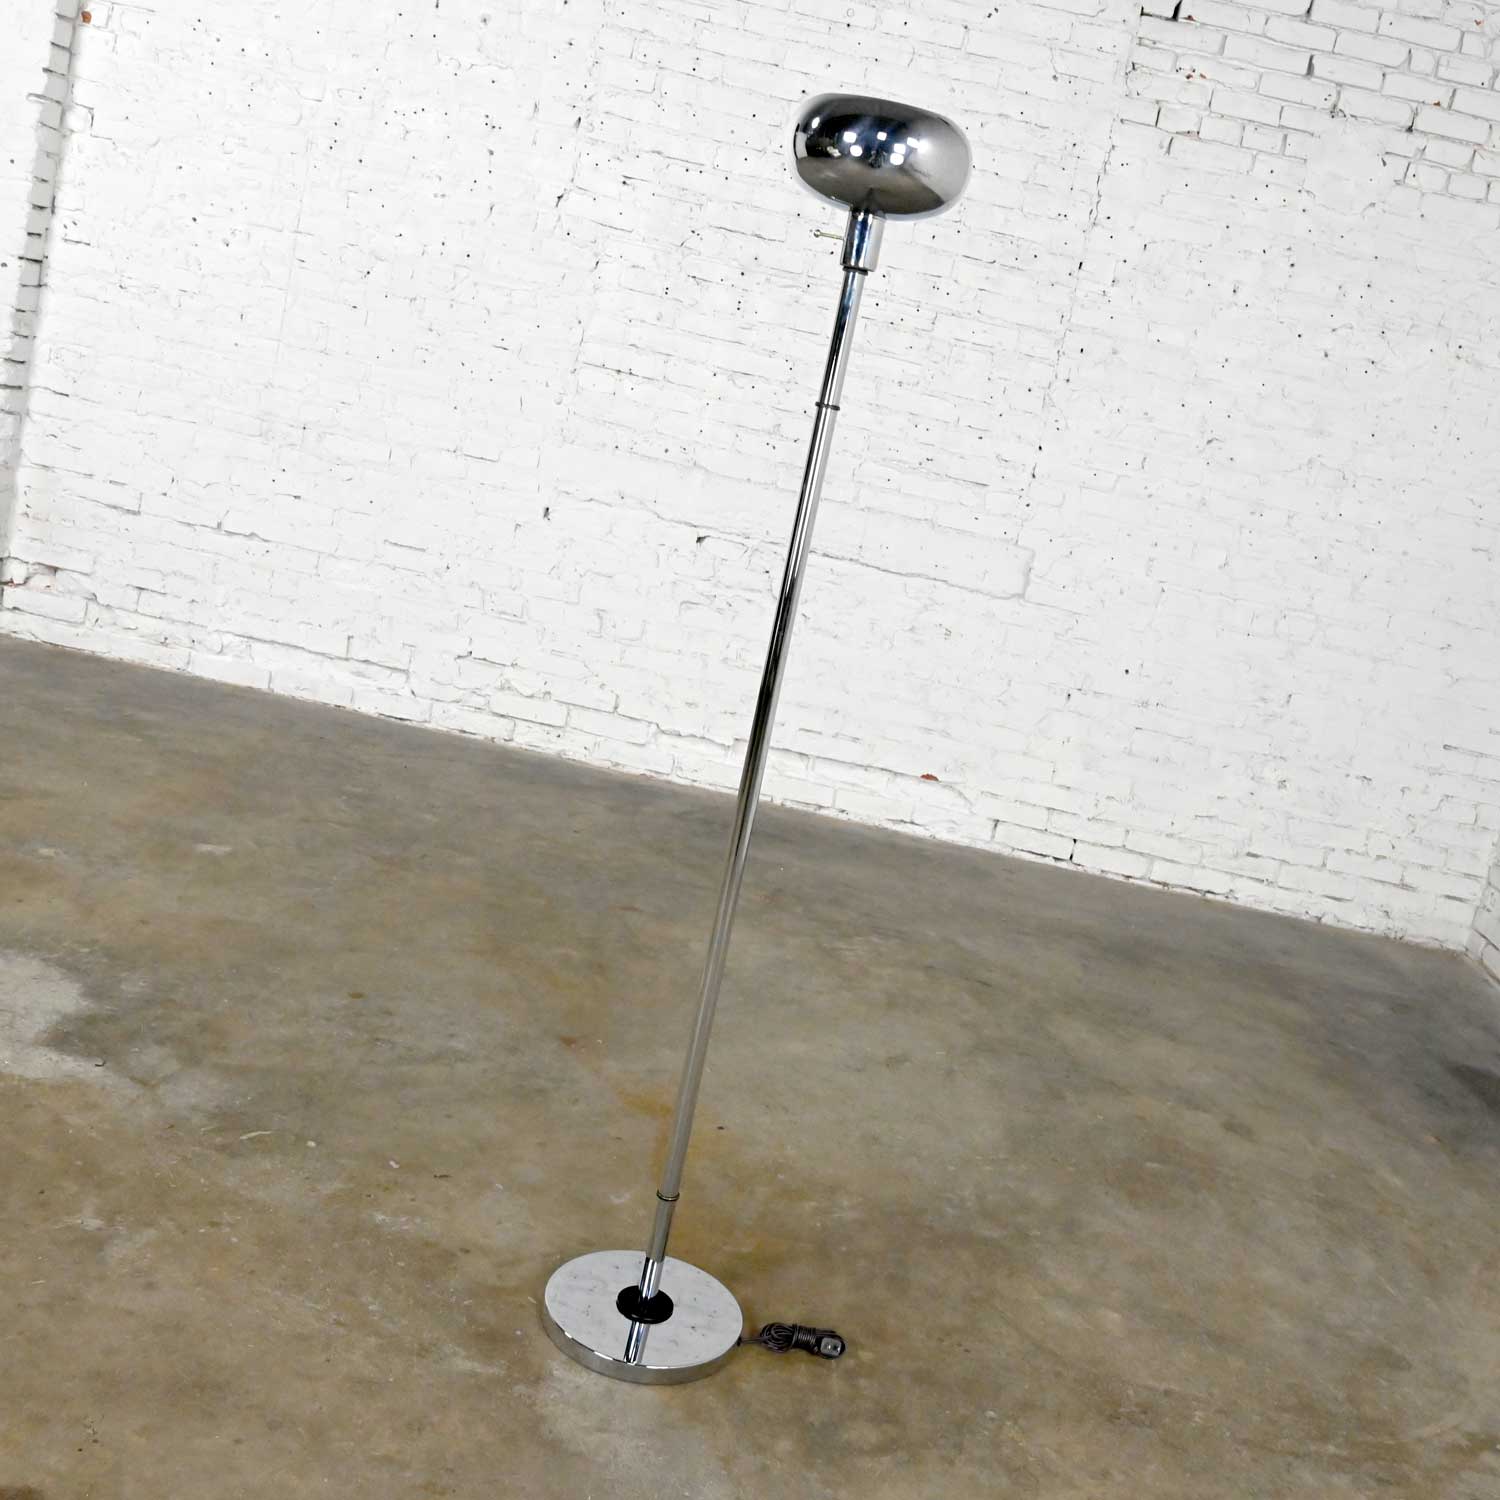 Vintage Mid-Century Modern Chrome Torchier Floor Lamp with Black Painted Accents